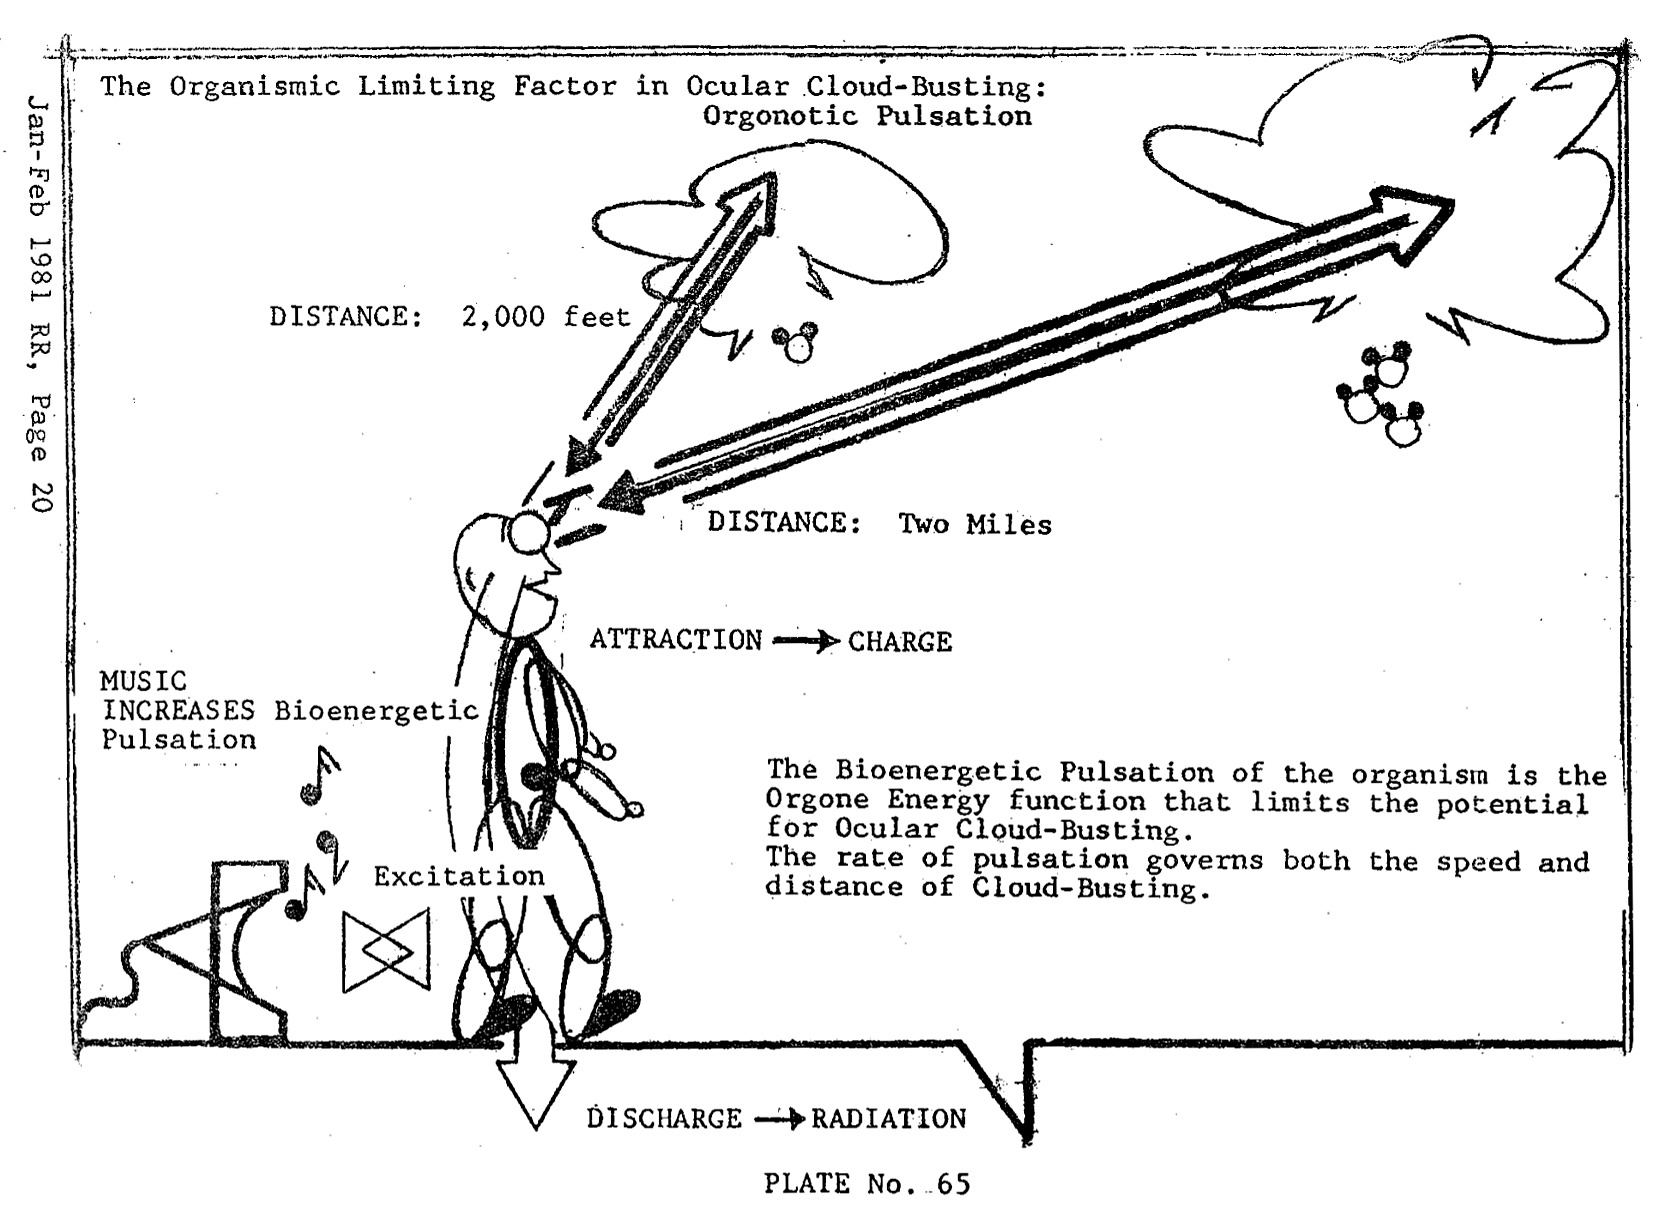 Diagram of Weber's theory of ocular cloudbusting: The Organismic Limiting Factor in Ocular Cloud-Busting: Orgonotic Pulsation. The Bioenergetic Pulsation of the organism is the Orgone Energy function that limits the potential for Ocular Cloud-Busting. The rate of pulsation governs both the speed and distance of Cloud-Busting.